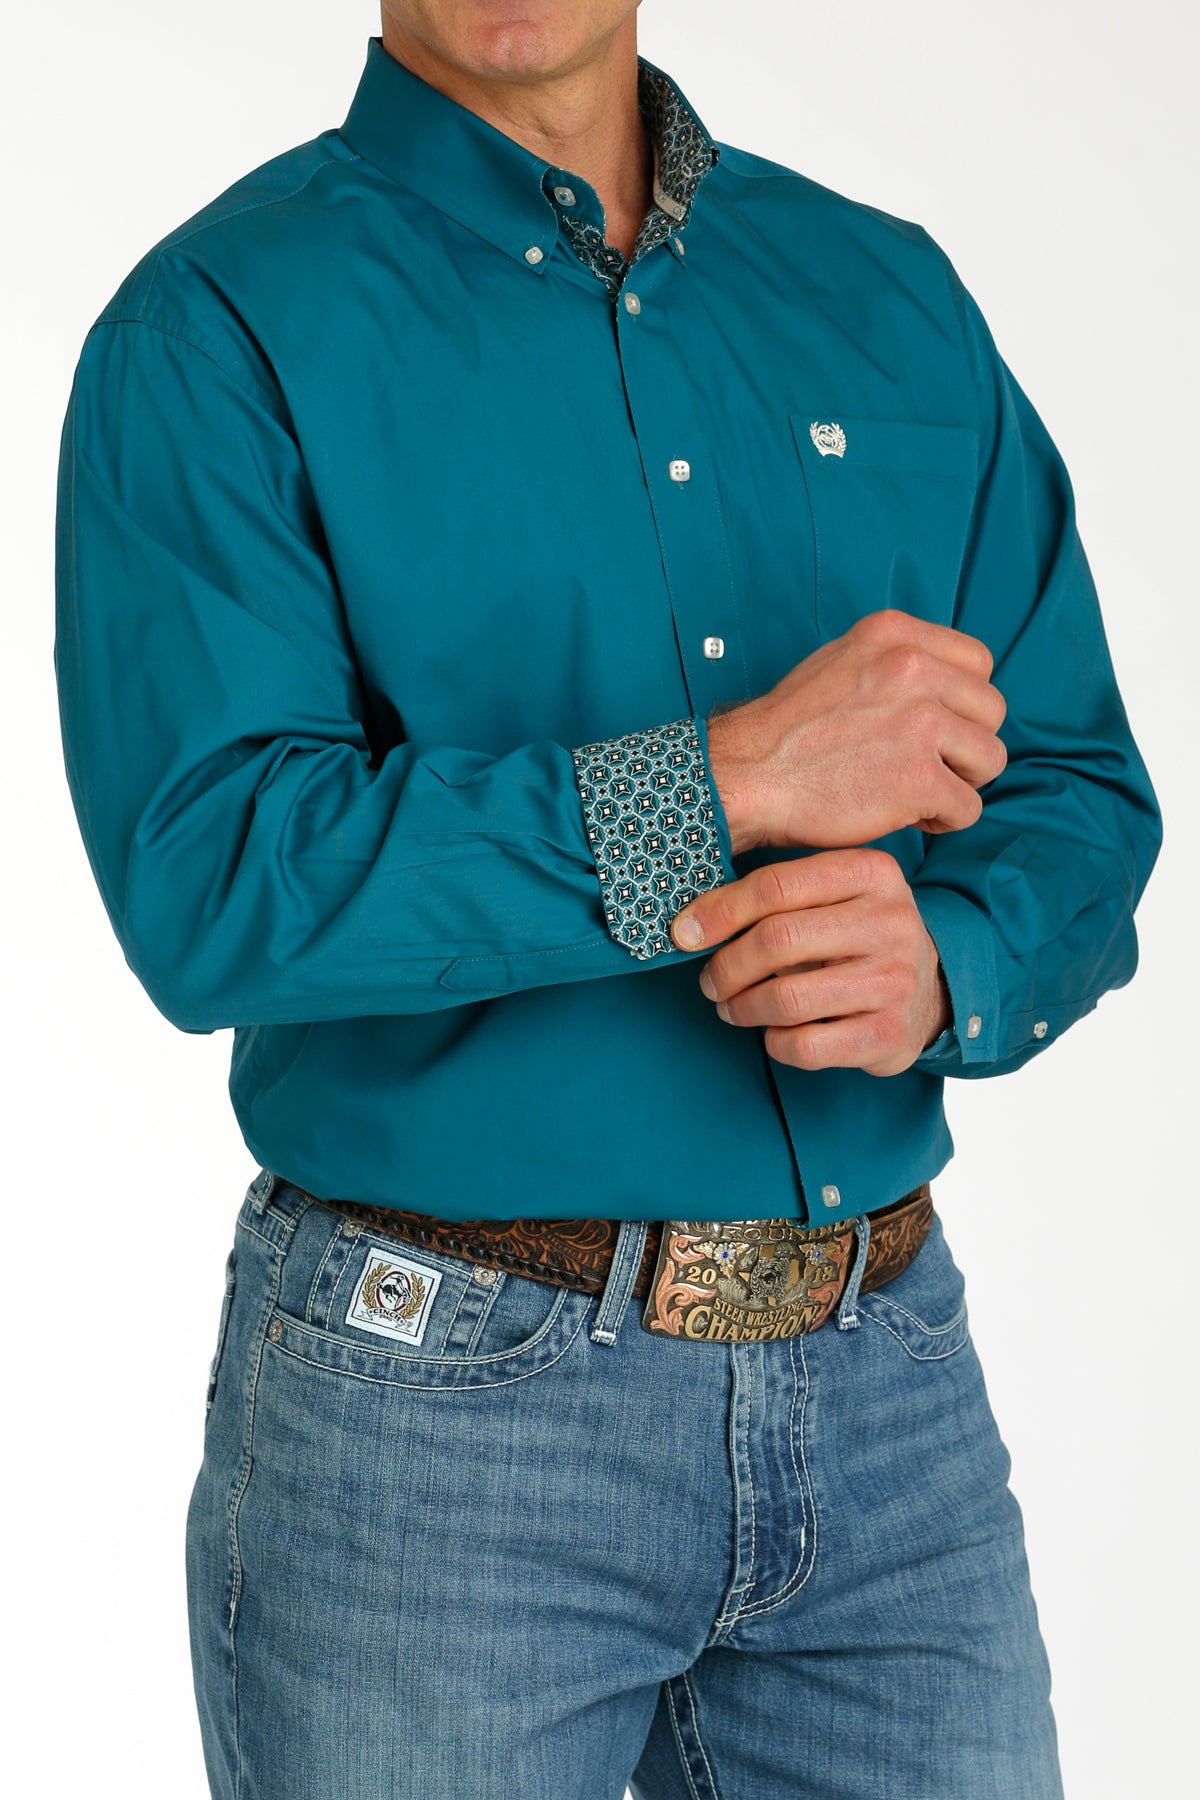 Cinch Men's L/S Classic Fit Solid Western Button Down Shirt in Teal